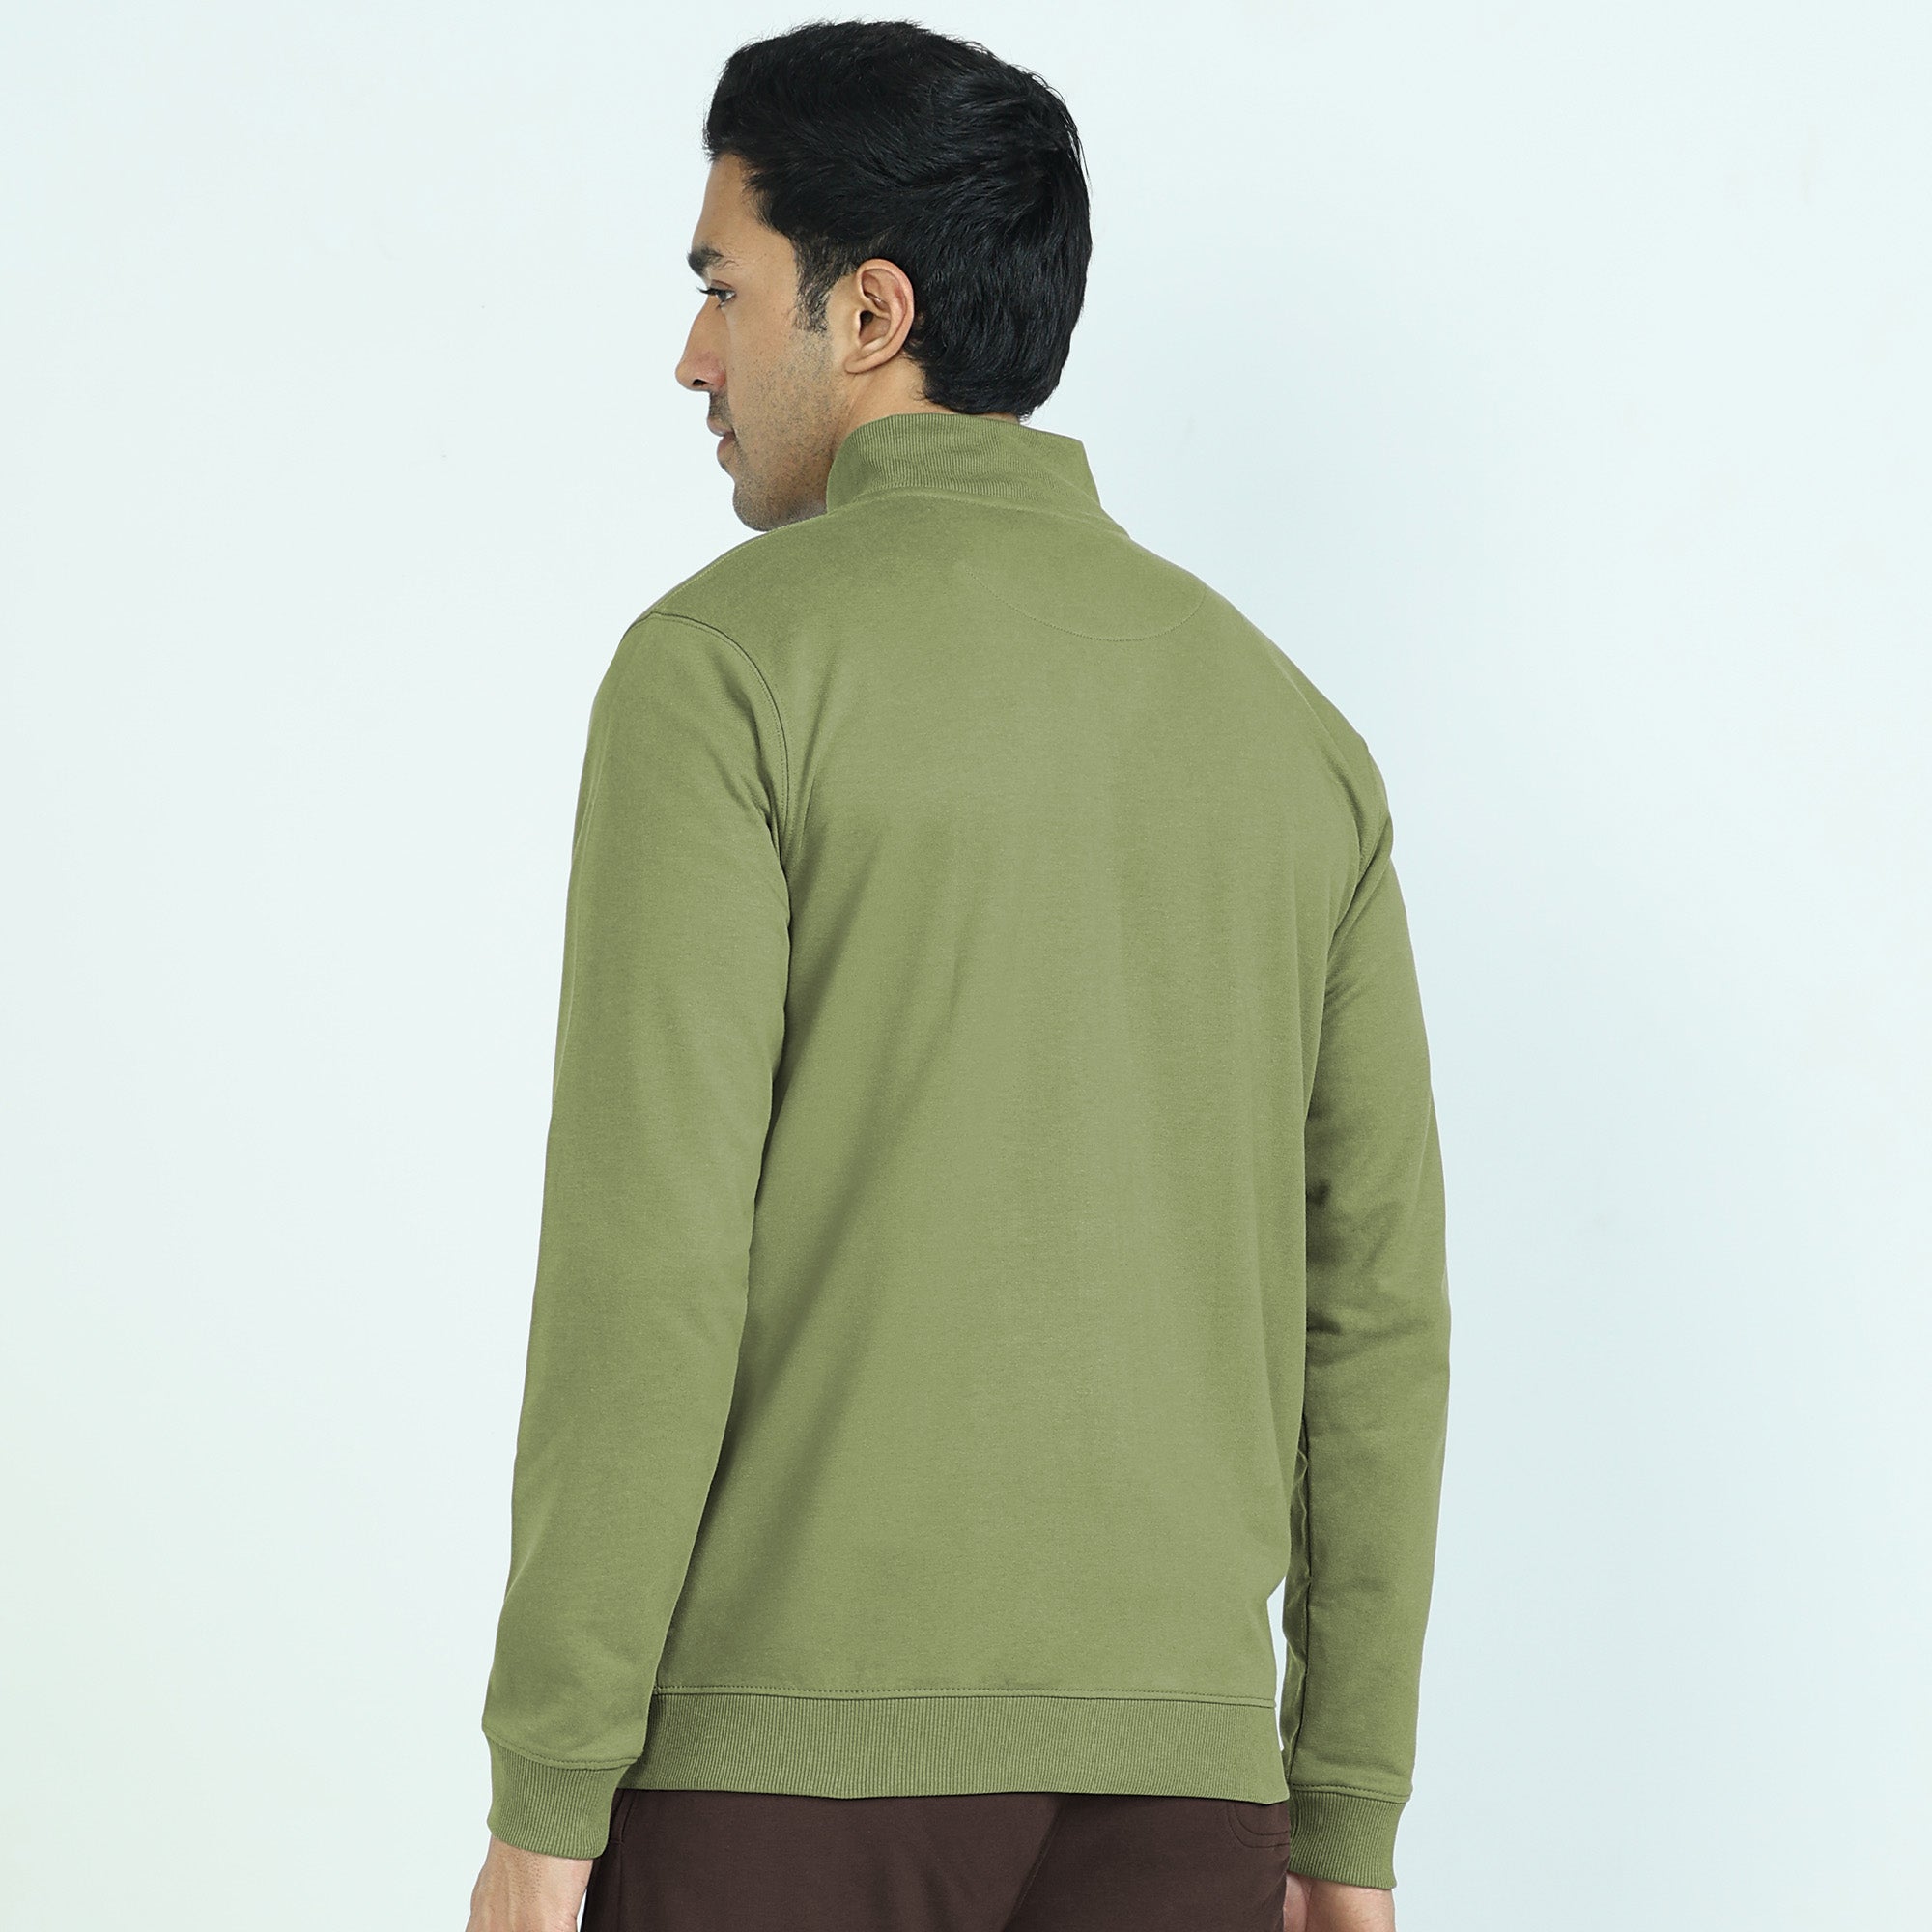 Cruze French Terry Cotton Zip Ups Olive Green